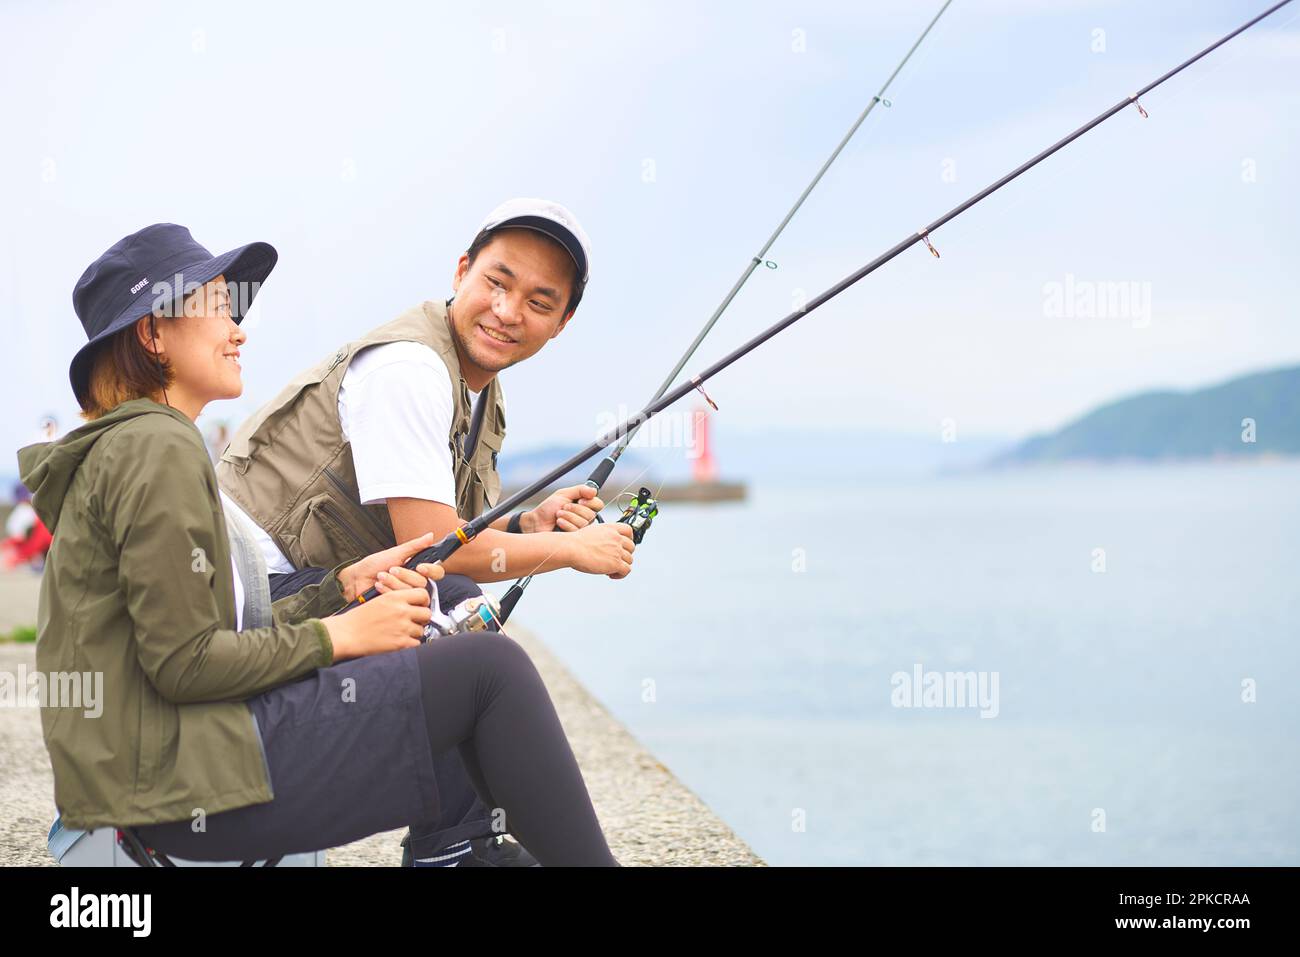 Man and woman sitting on the bank fishing Stock Photo